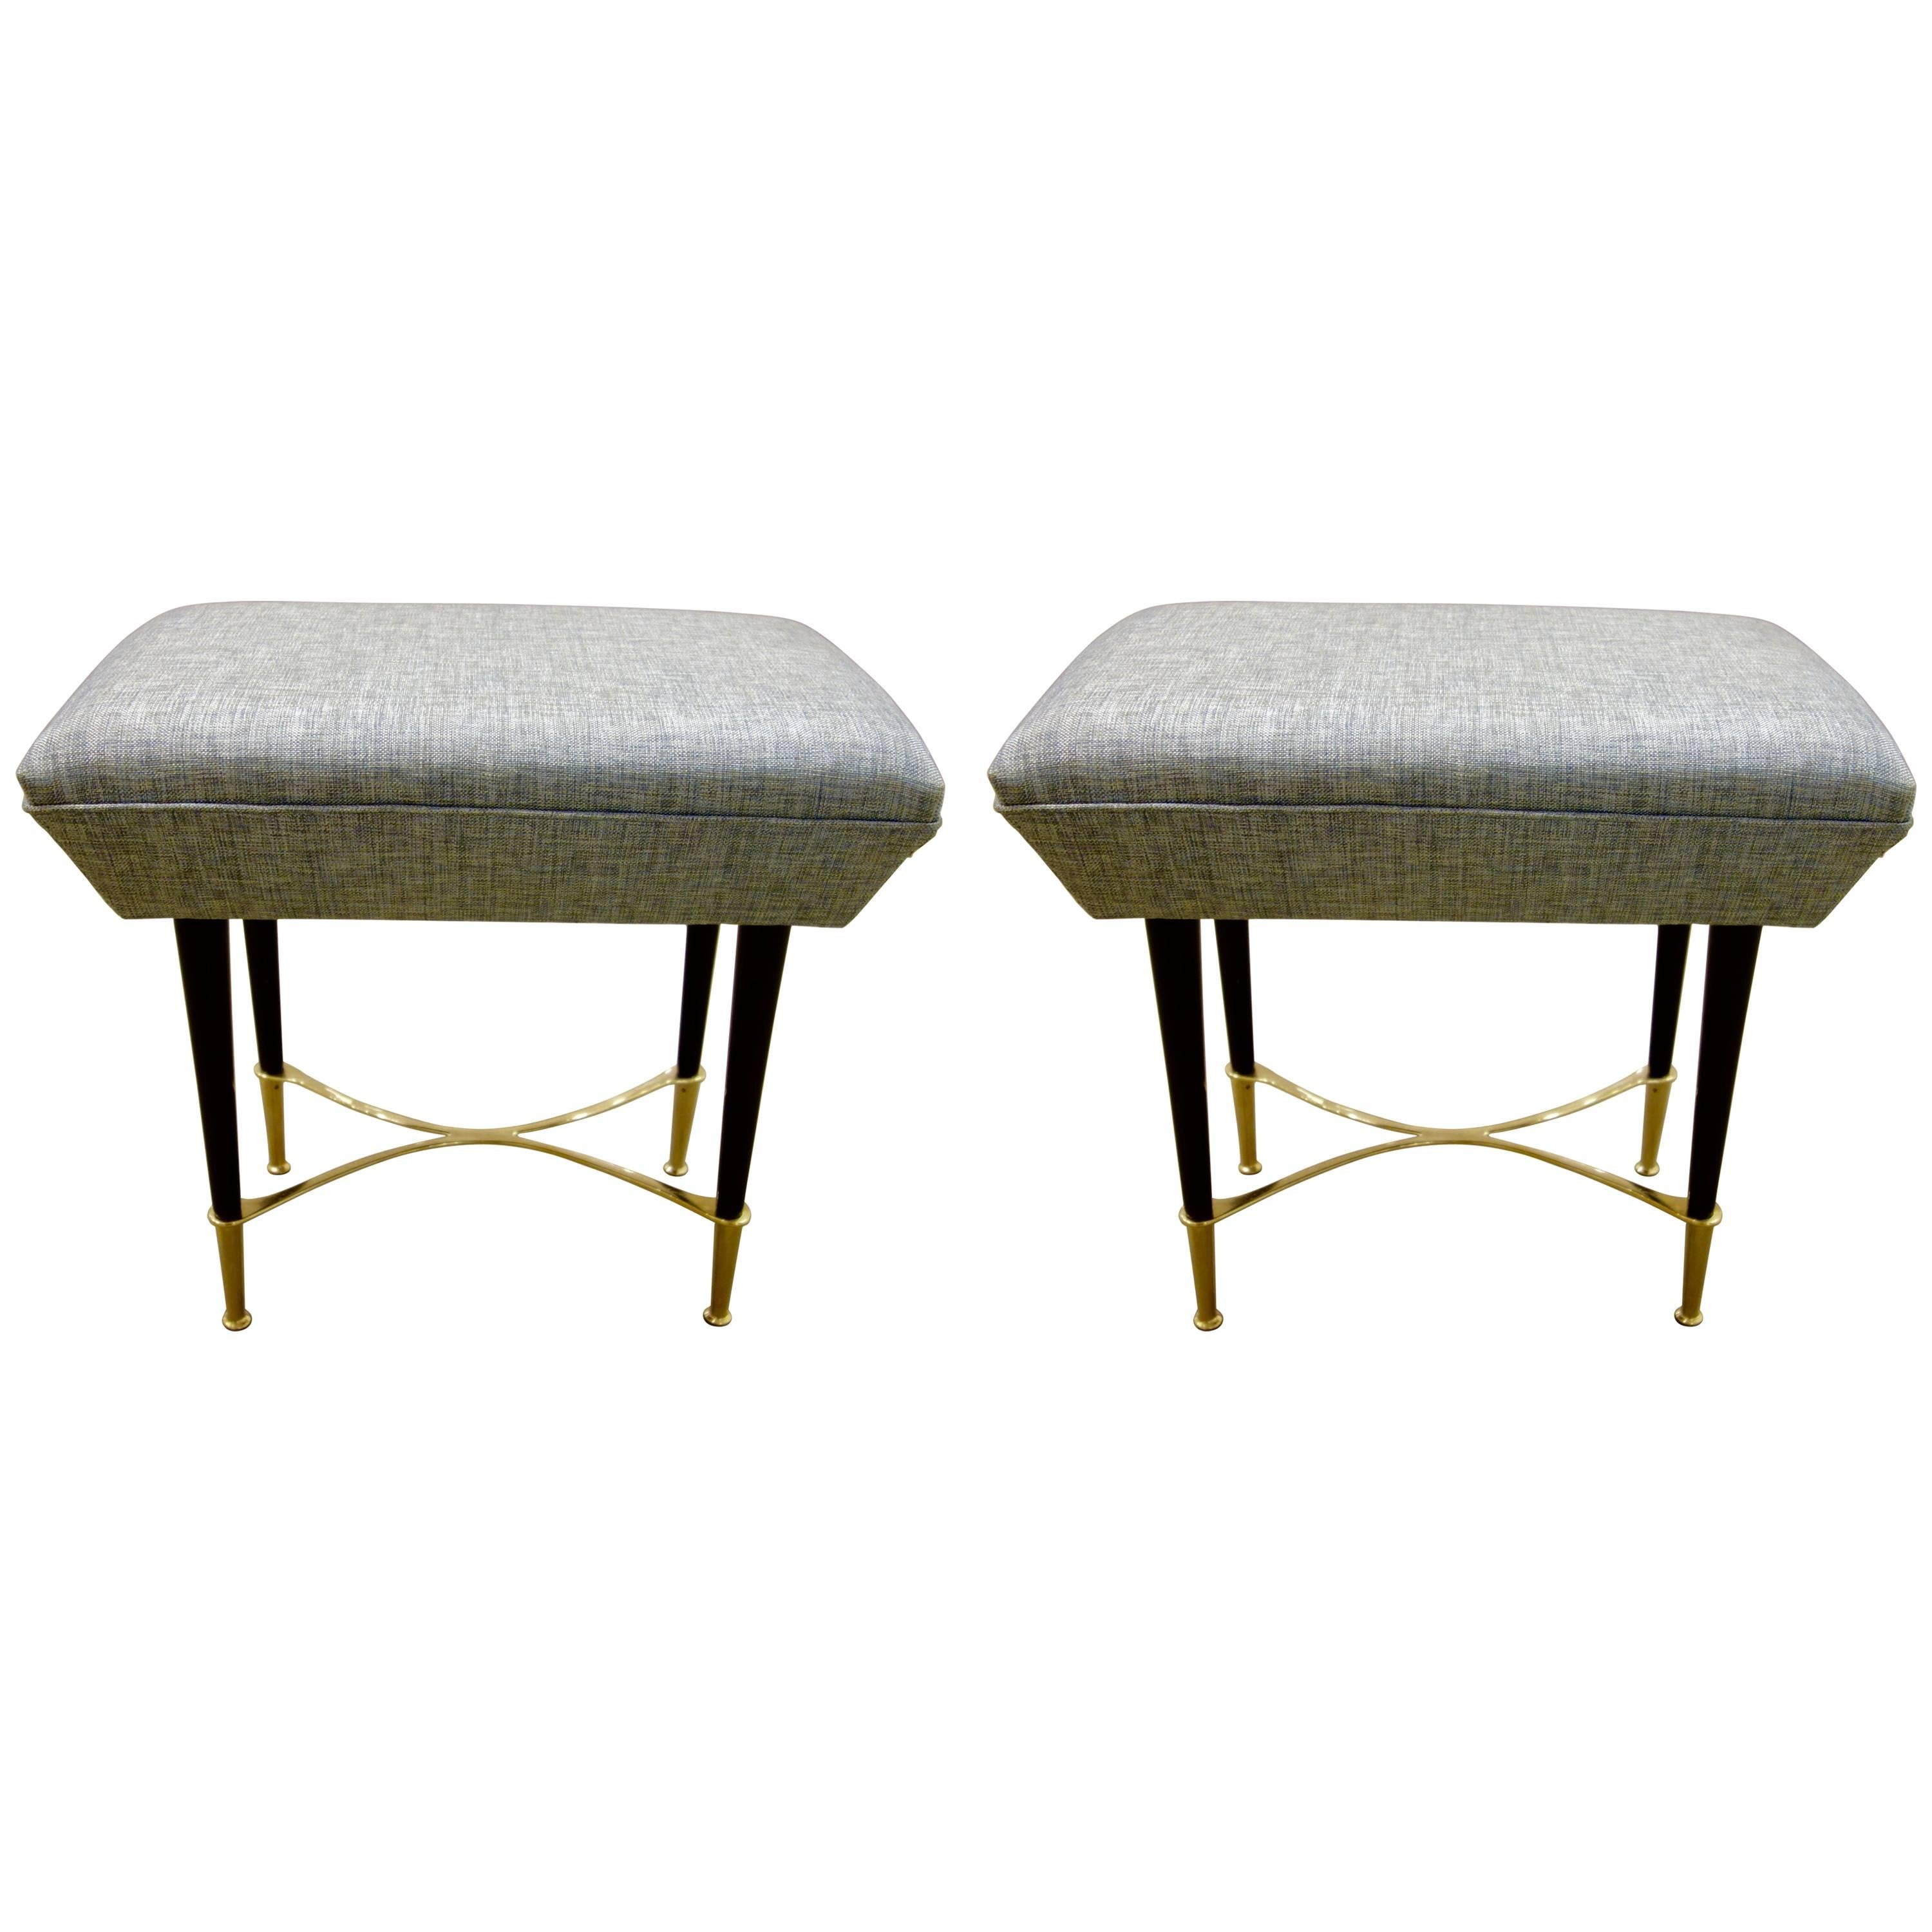 Pair of Italian Mid-Century Slate Blue Wood and Brass Stools or Ottomans